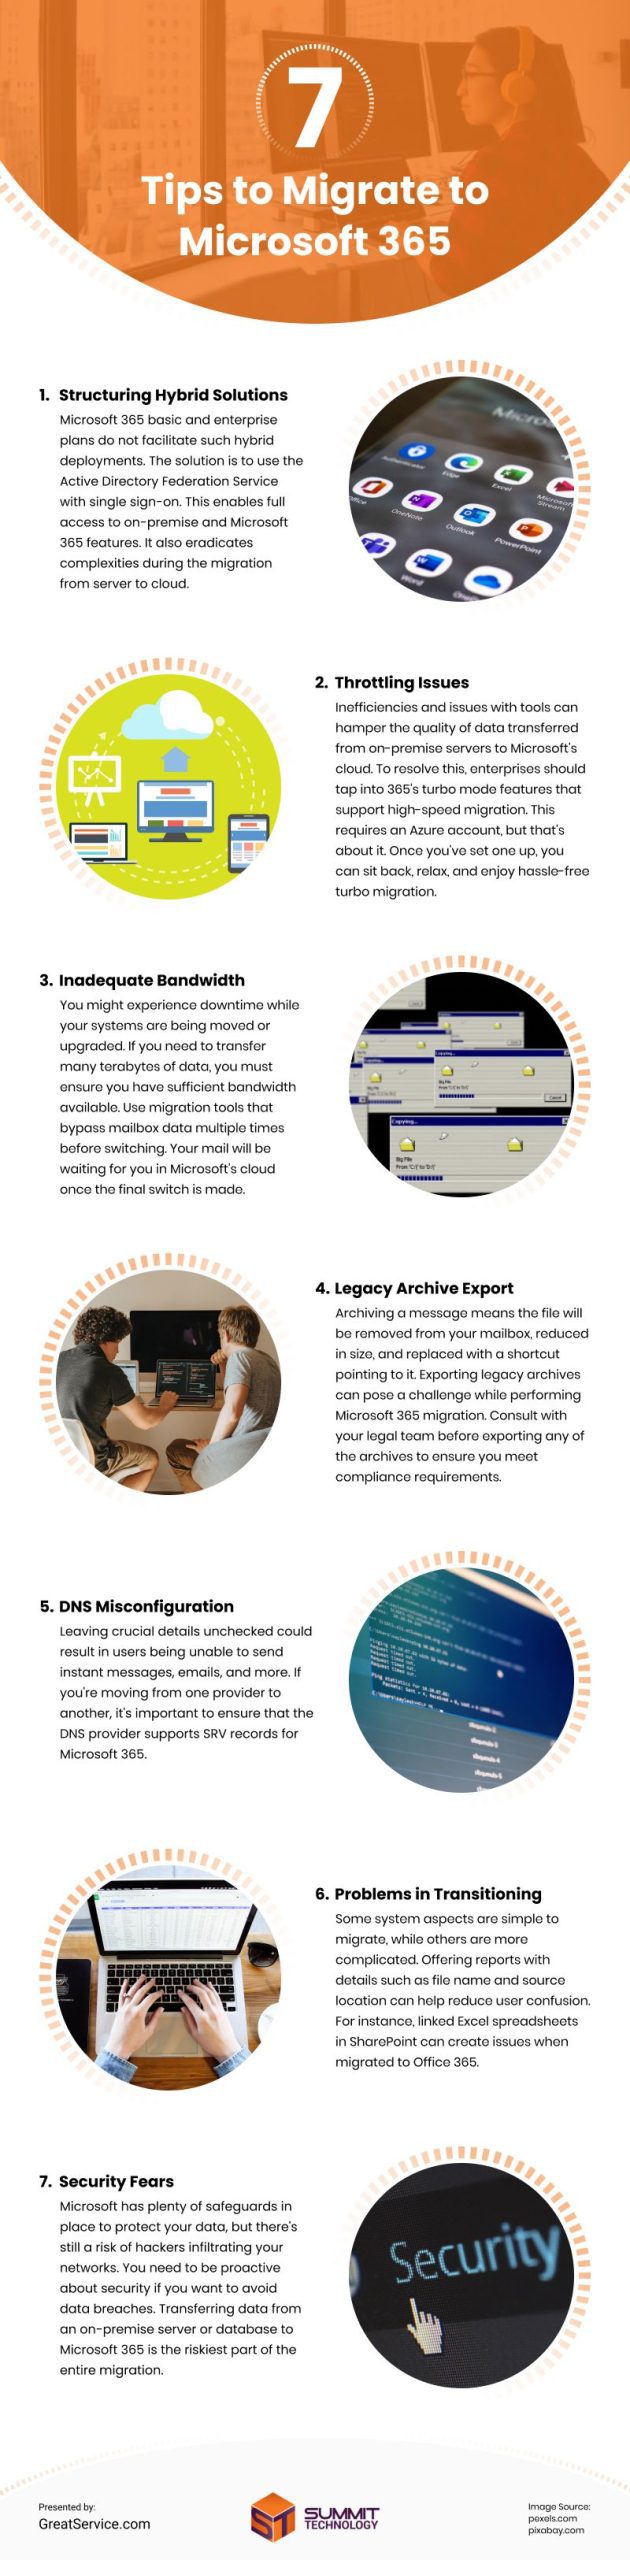 7 Tips to Migrate to Microsoft 365 Infographic